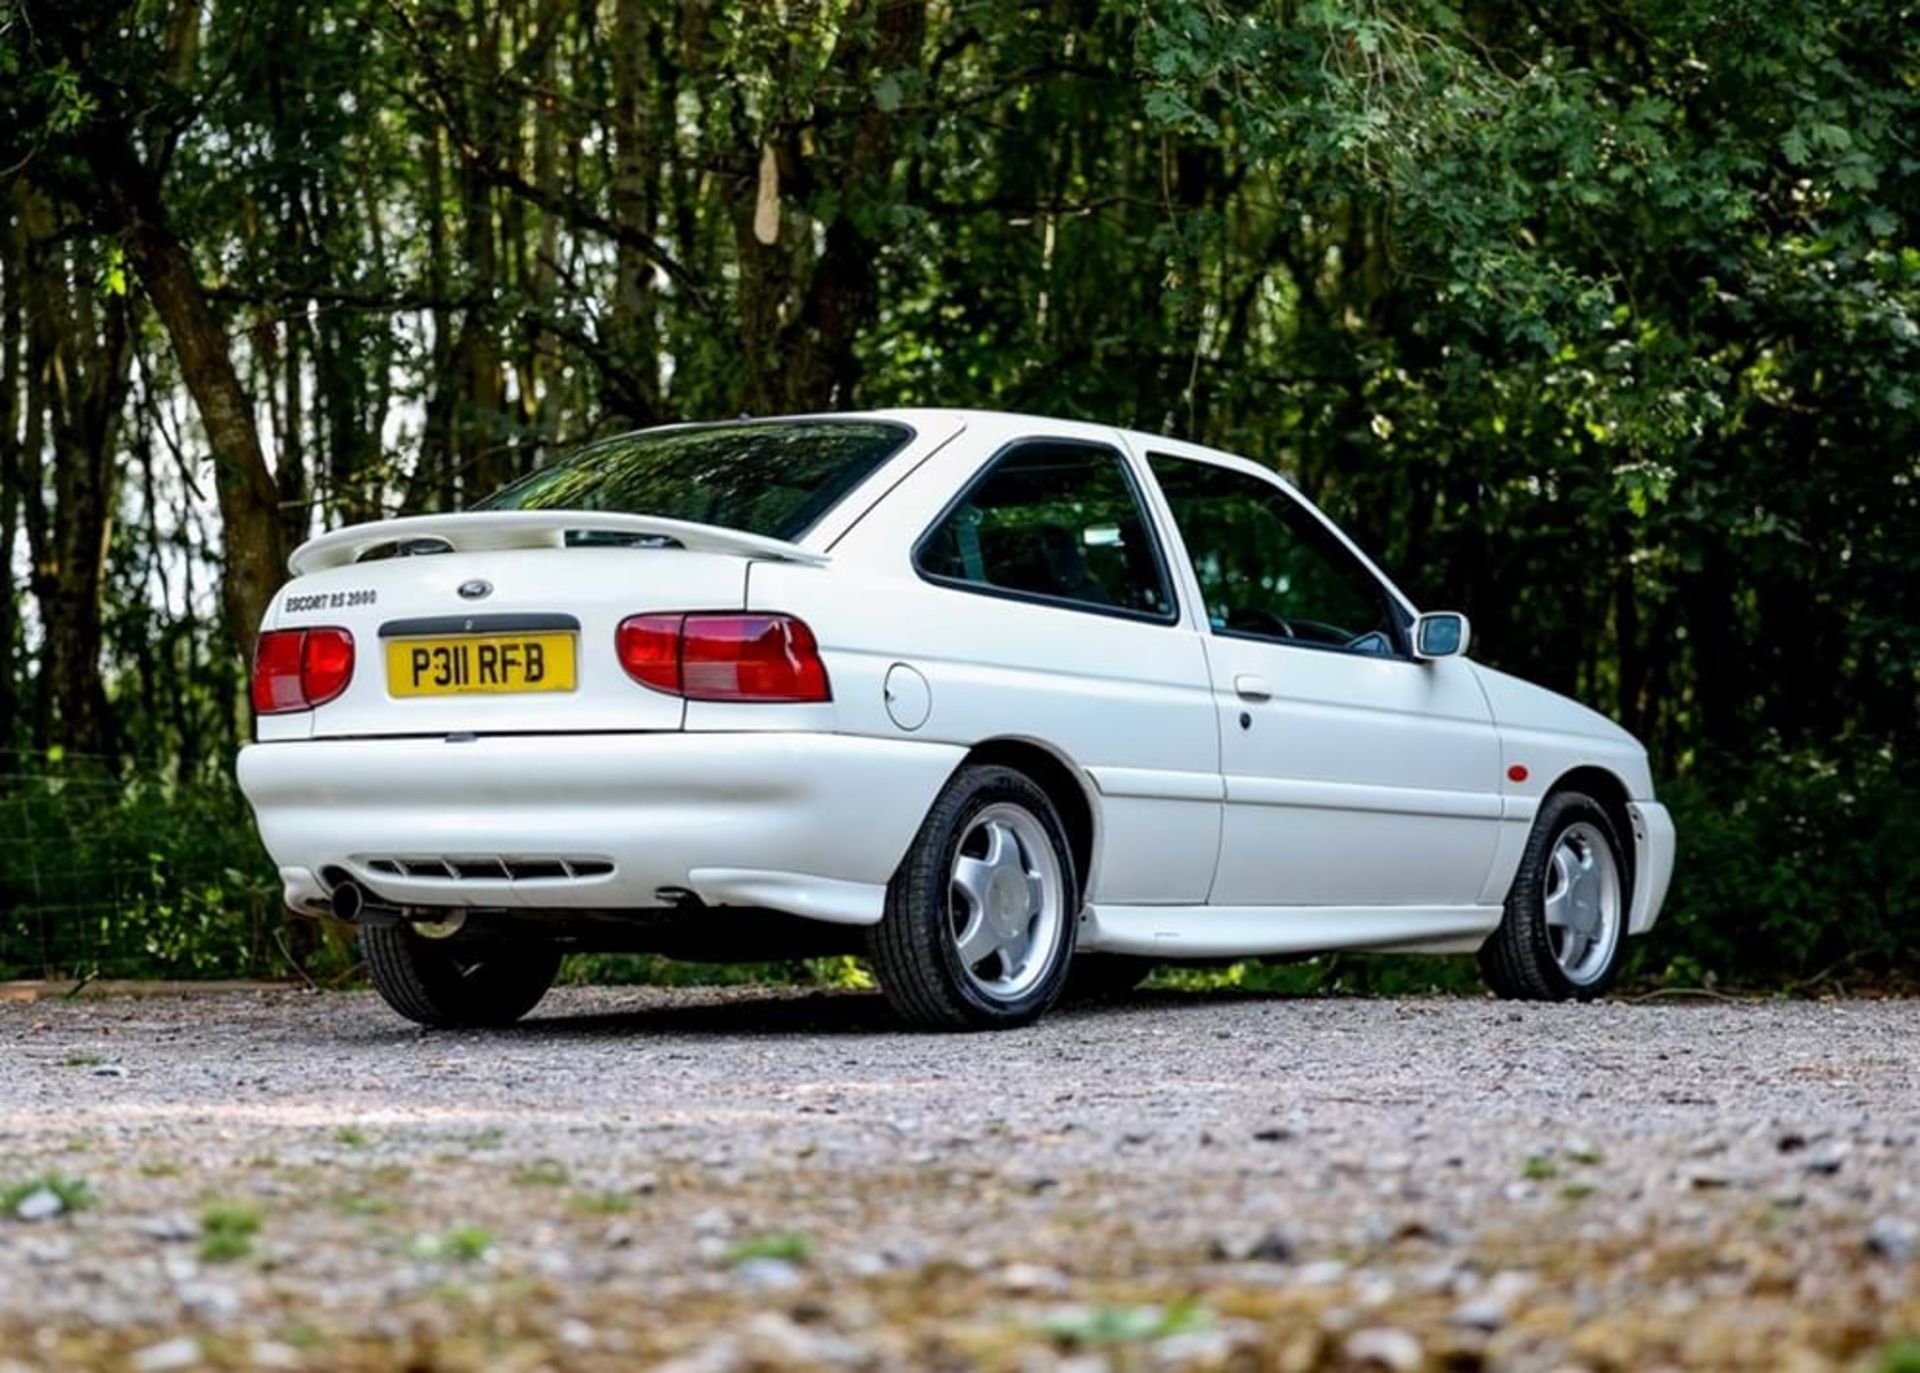 1996 Ford Escort RS2000 - Image 3 of 10